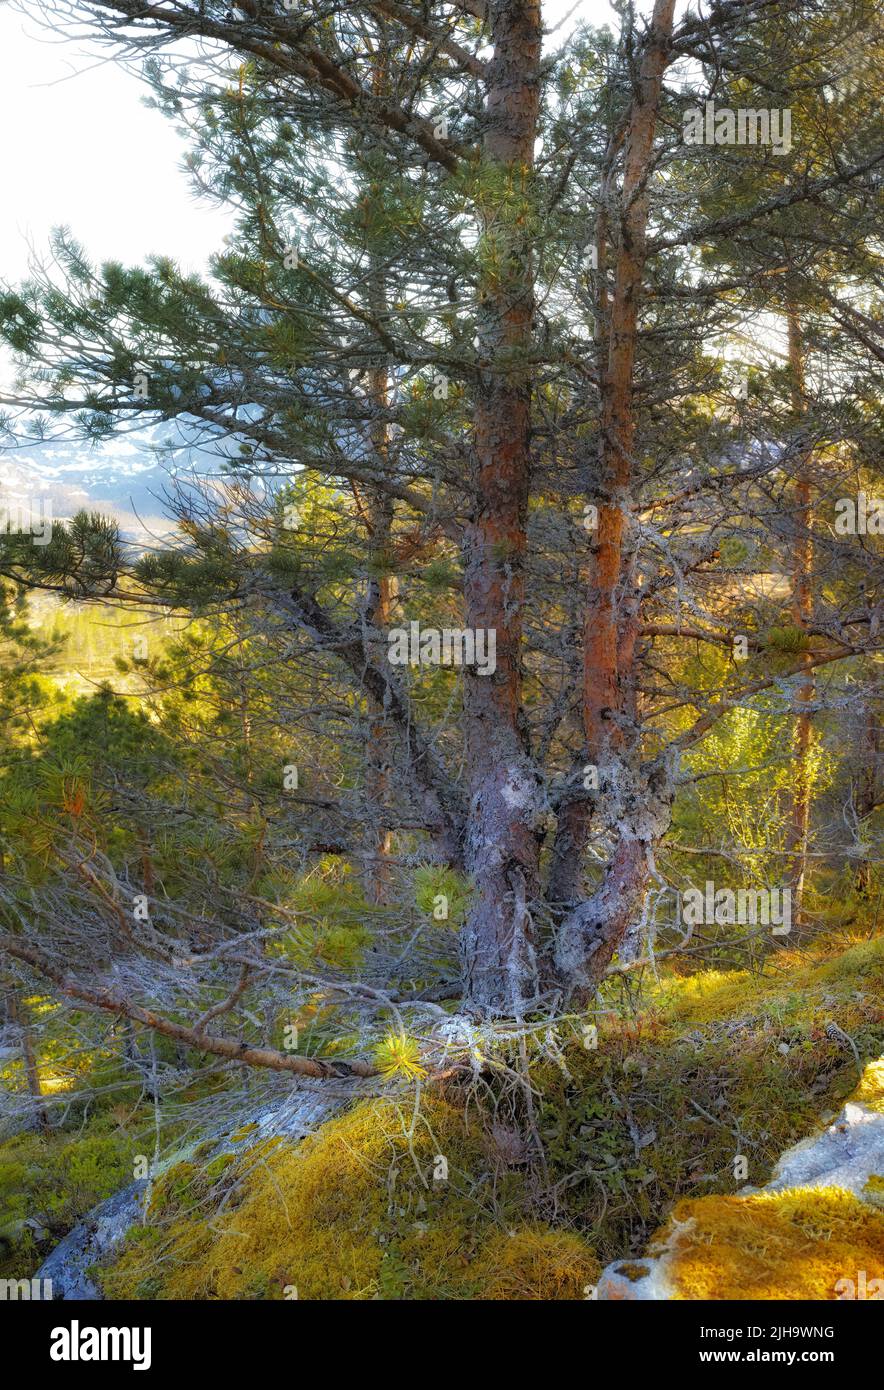 Lush rocky wilderness with wild trees and shrubs in Bodo, Nordland, Noway. Scenic natural landscape with wooden texture of old bark in a remote and Stock Photo